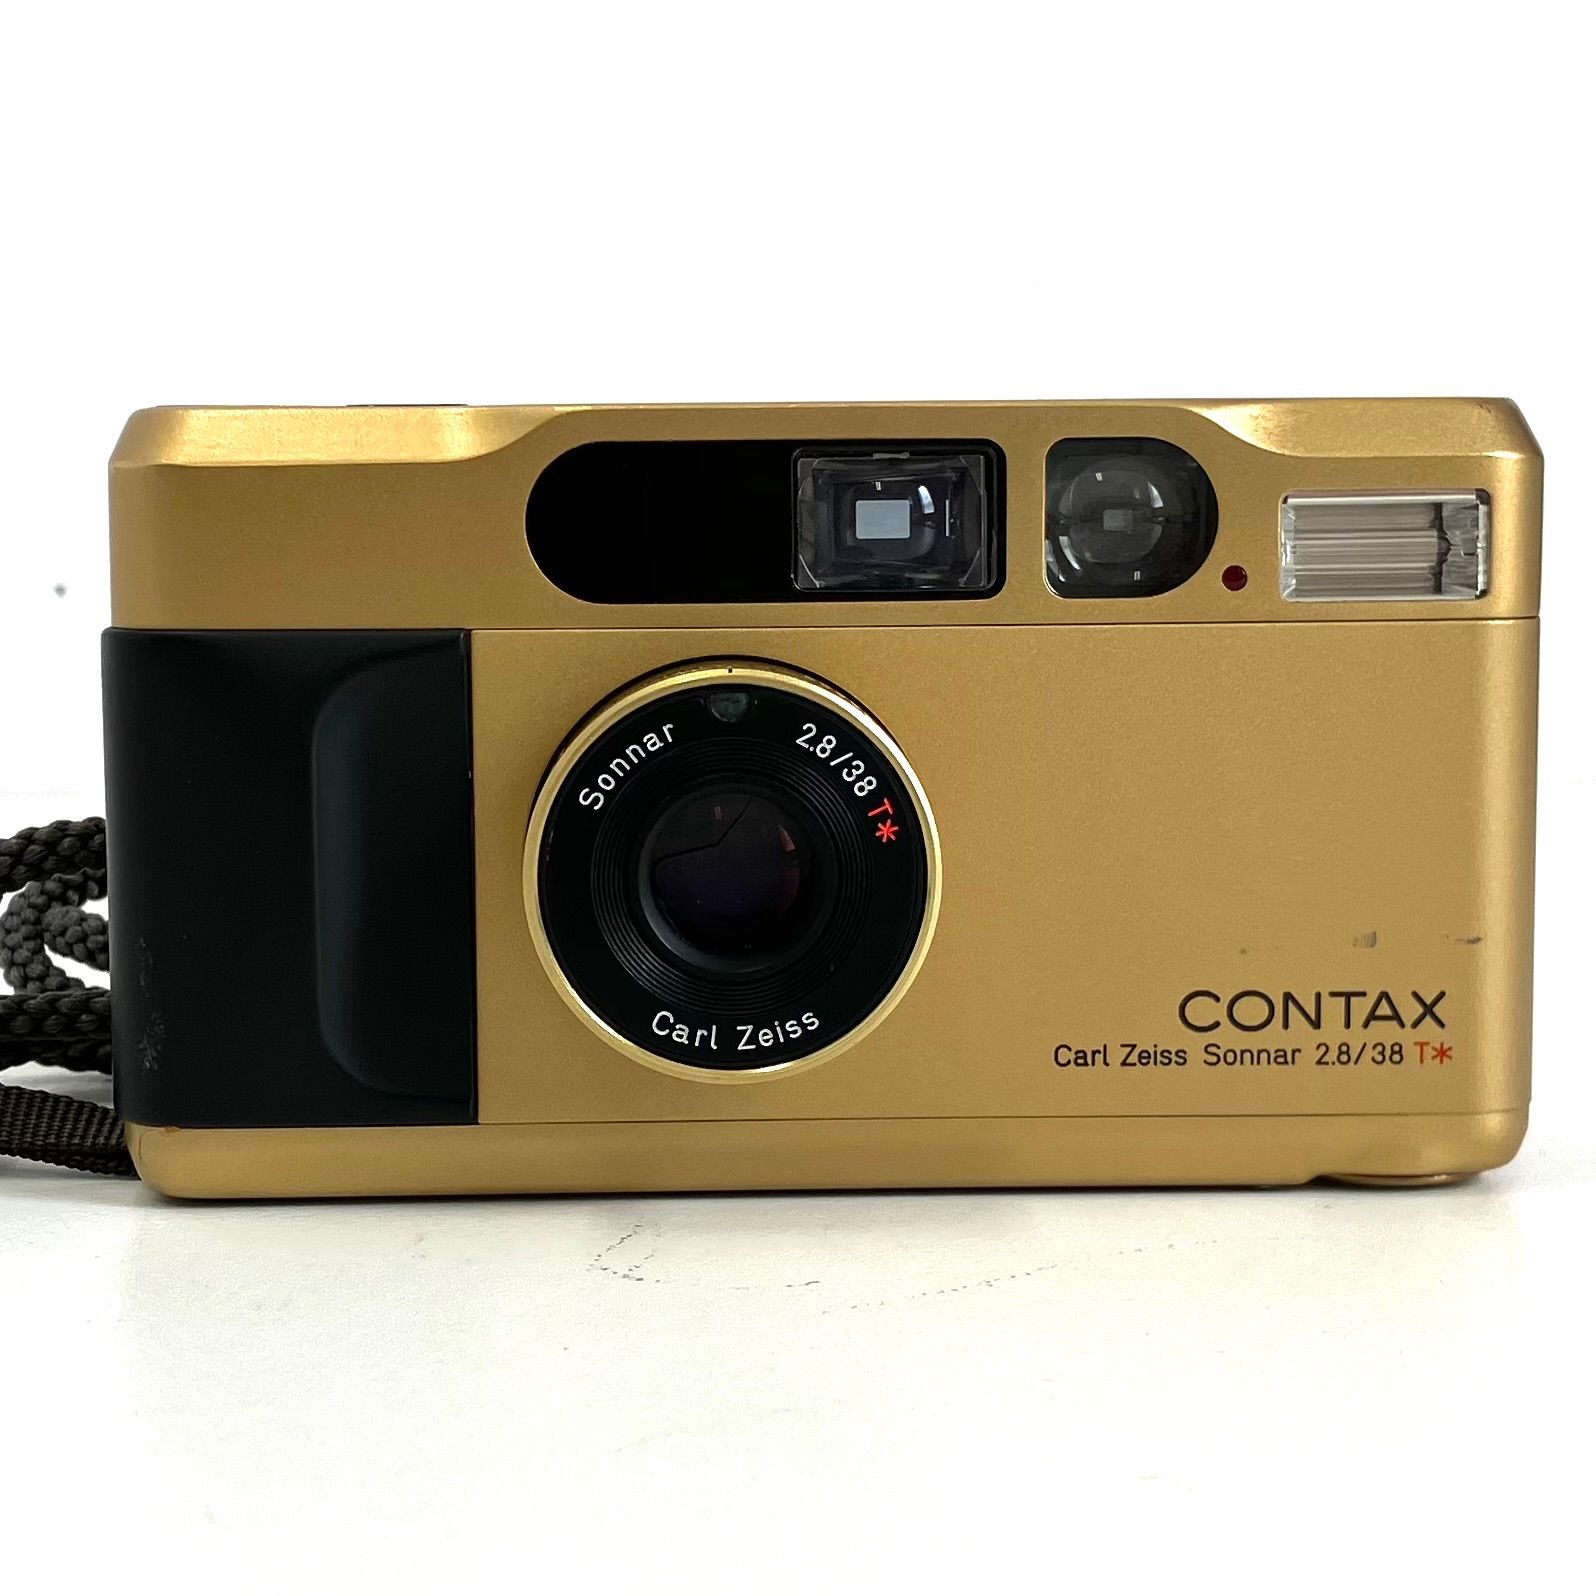 08043】 CONTAX T2 / Carl Zeiss Sonnar F2.8 38mm T* チタンゴールド ...